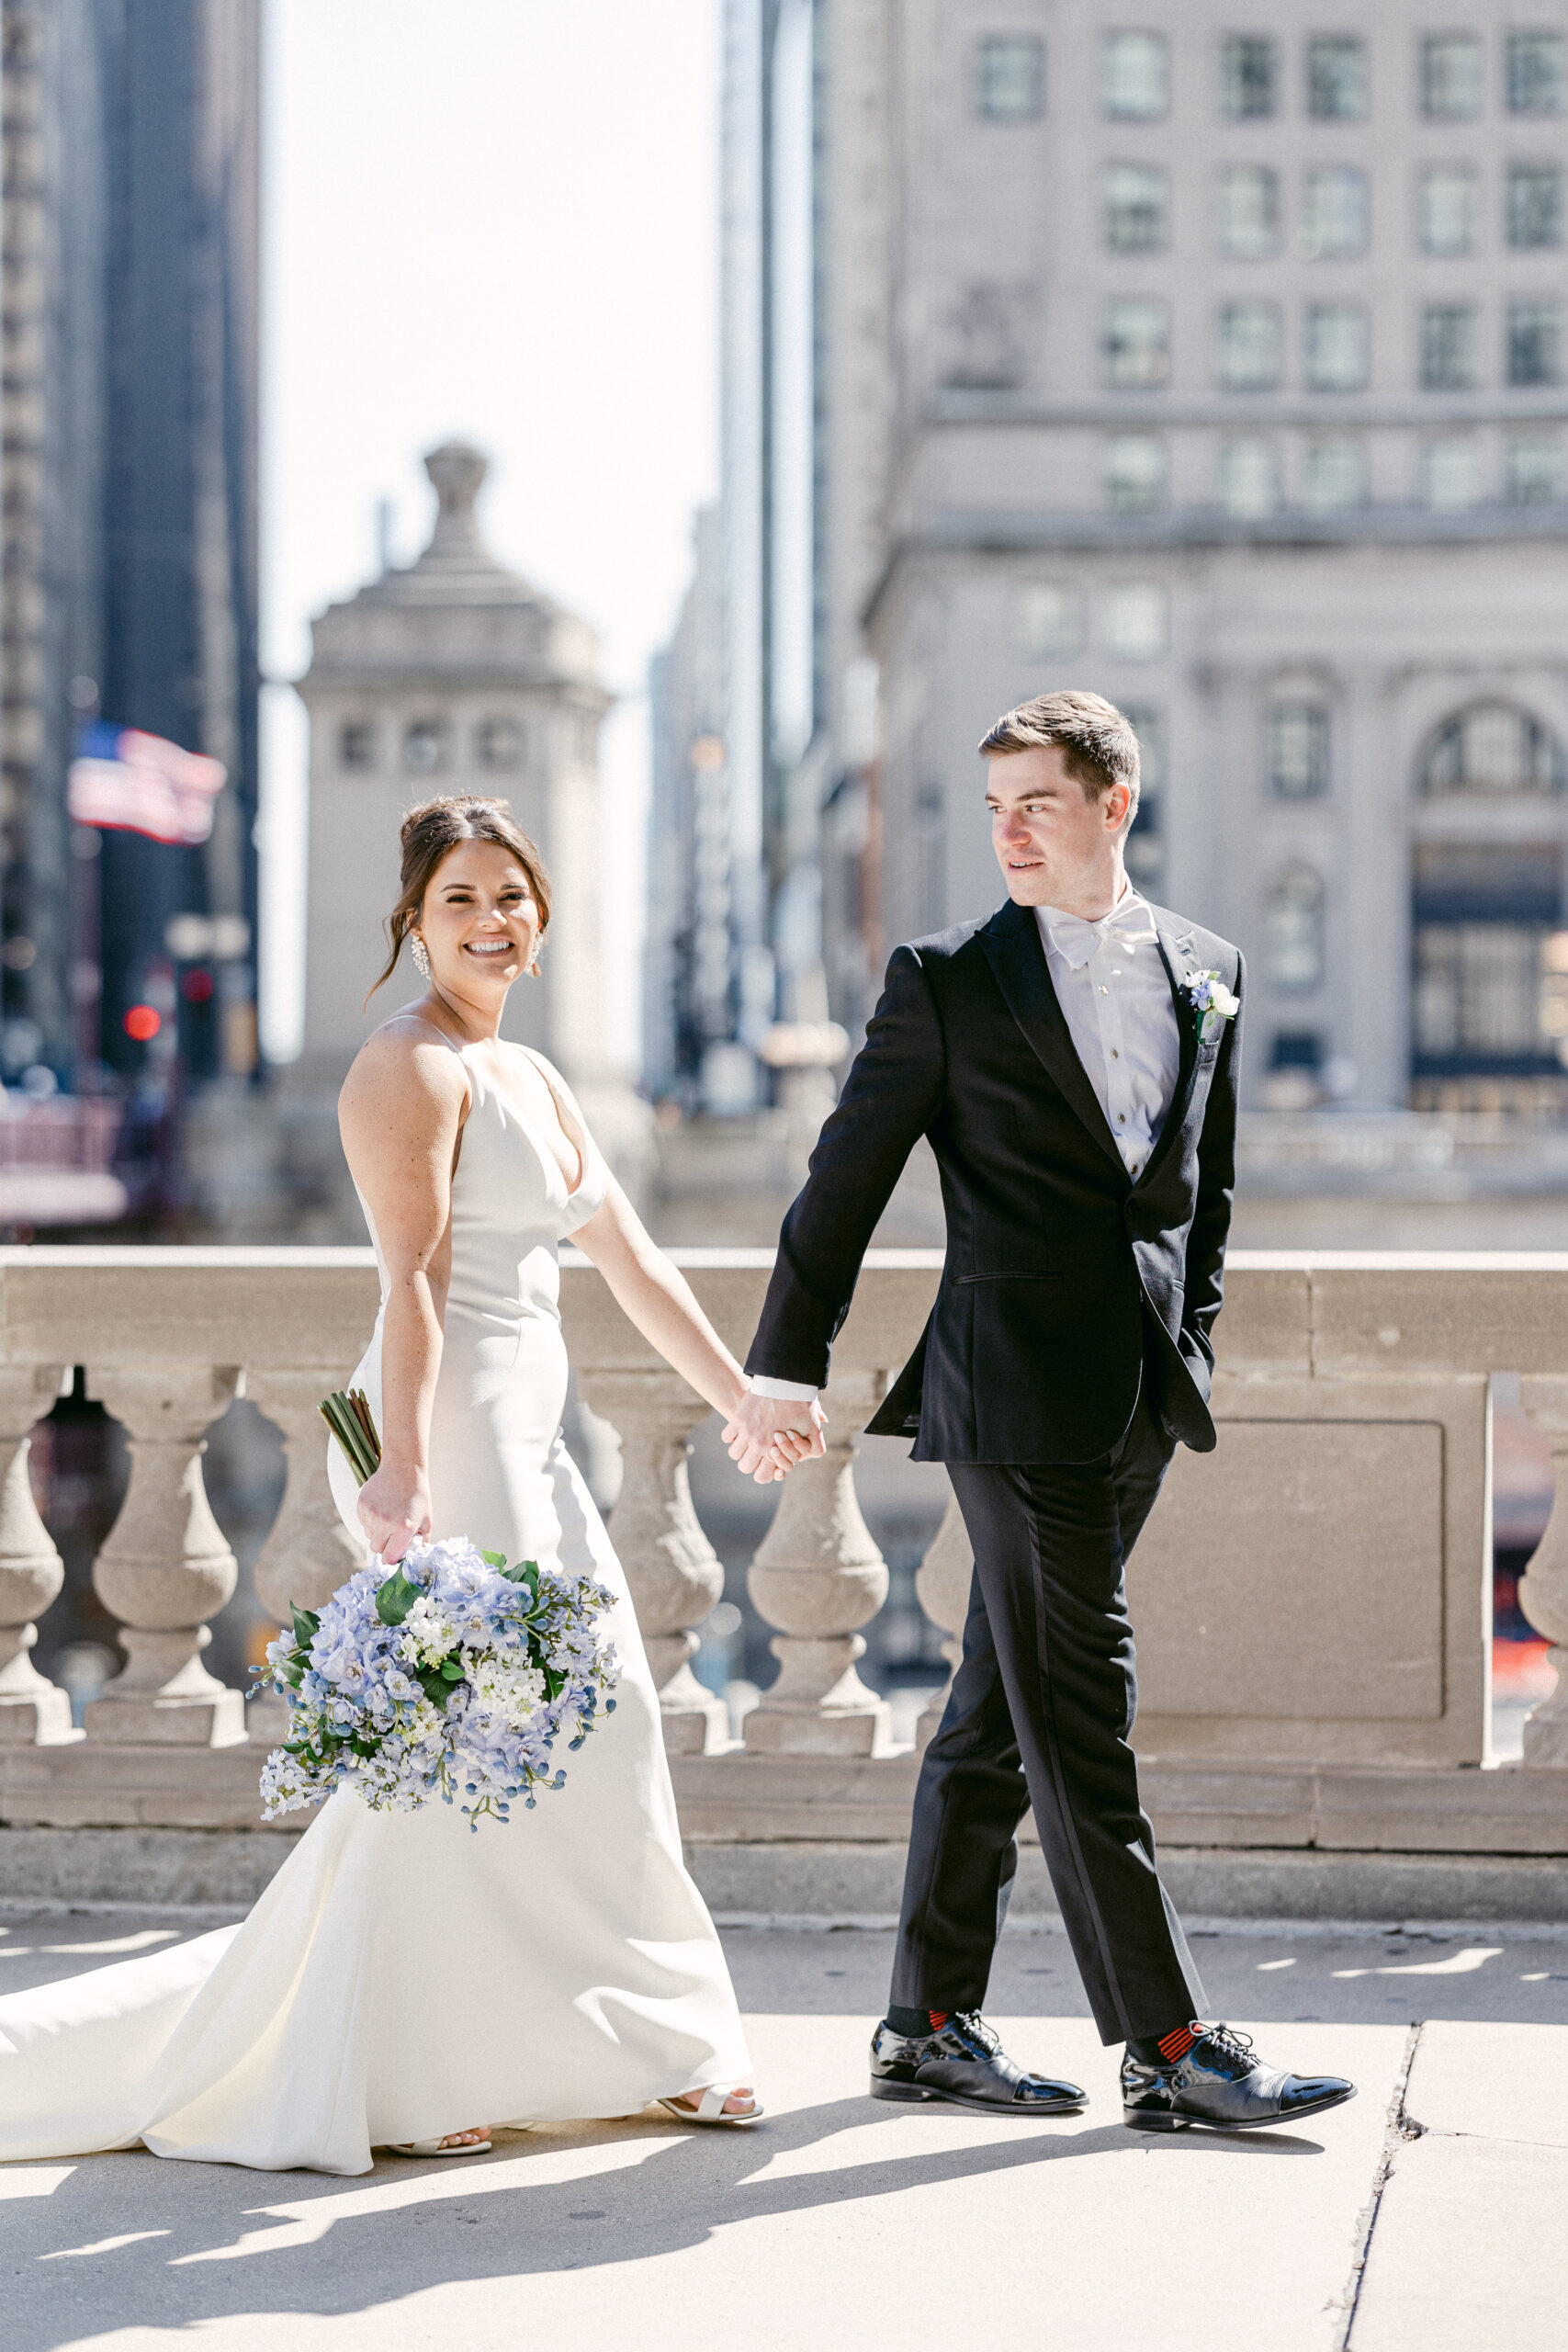 A wedding couple walks hand-in-hand down a near Chicago's riverwalk. They are both smiling and laughing, and they look very happy together. The sun is shining, and the bride is smiling at the camera while holding her bouquet. Her new husband glances back at her while smiling. It is a beautiful day, and the couple is enjoying each other's company.